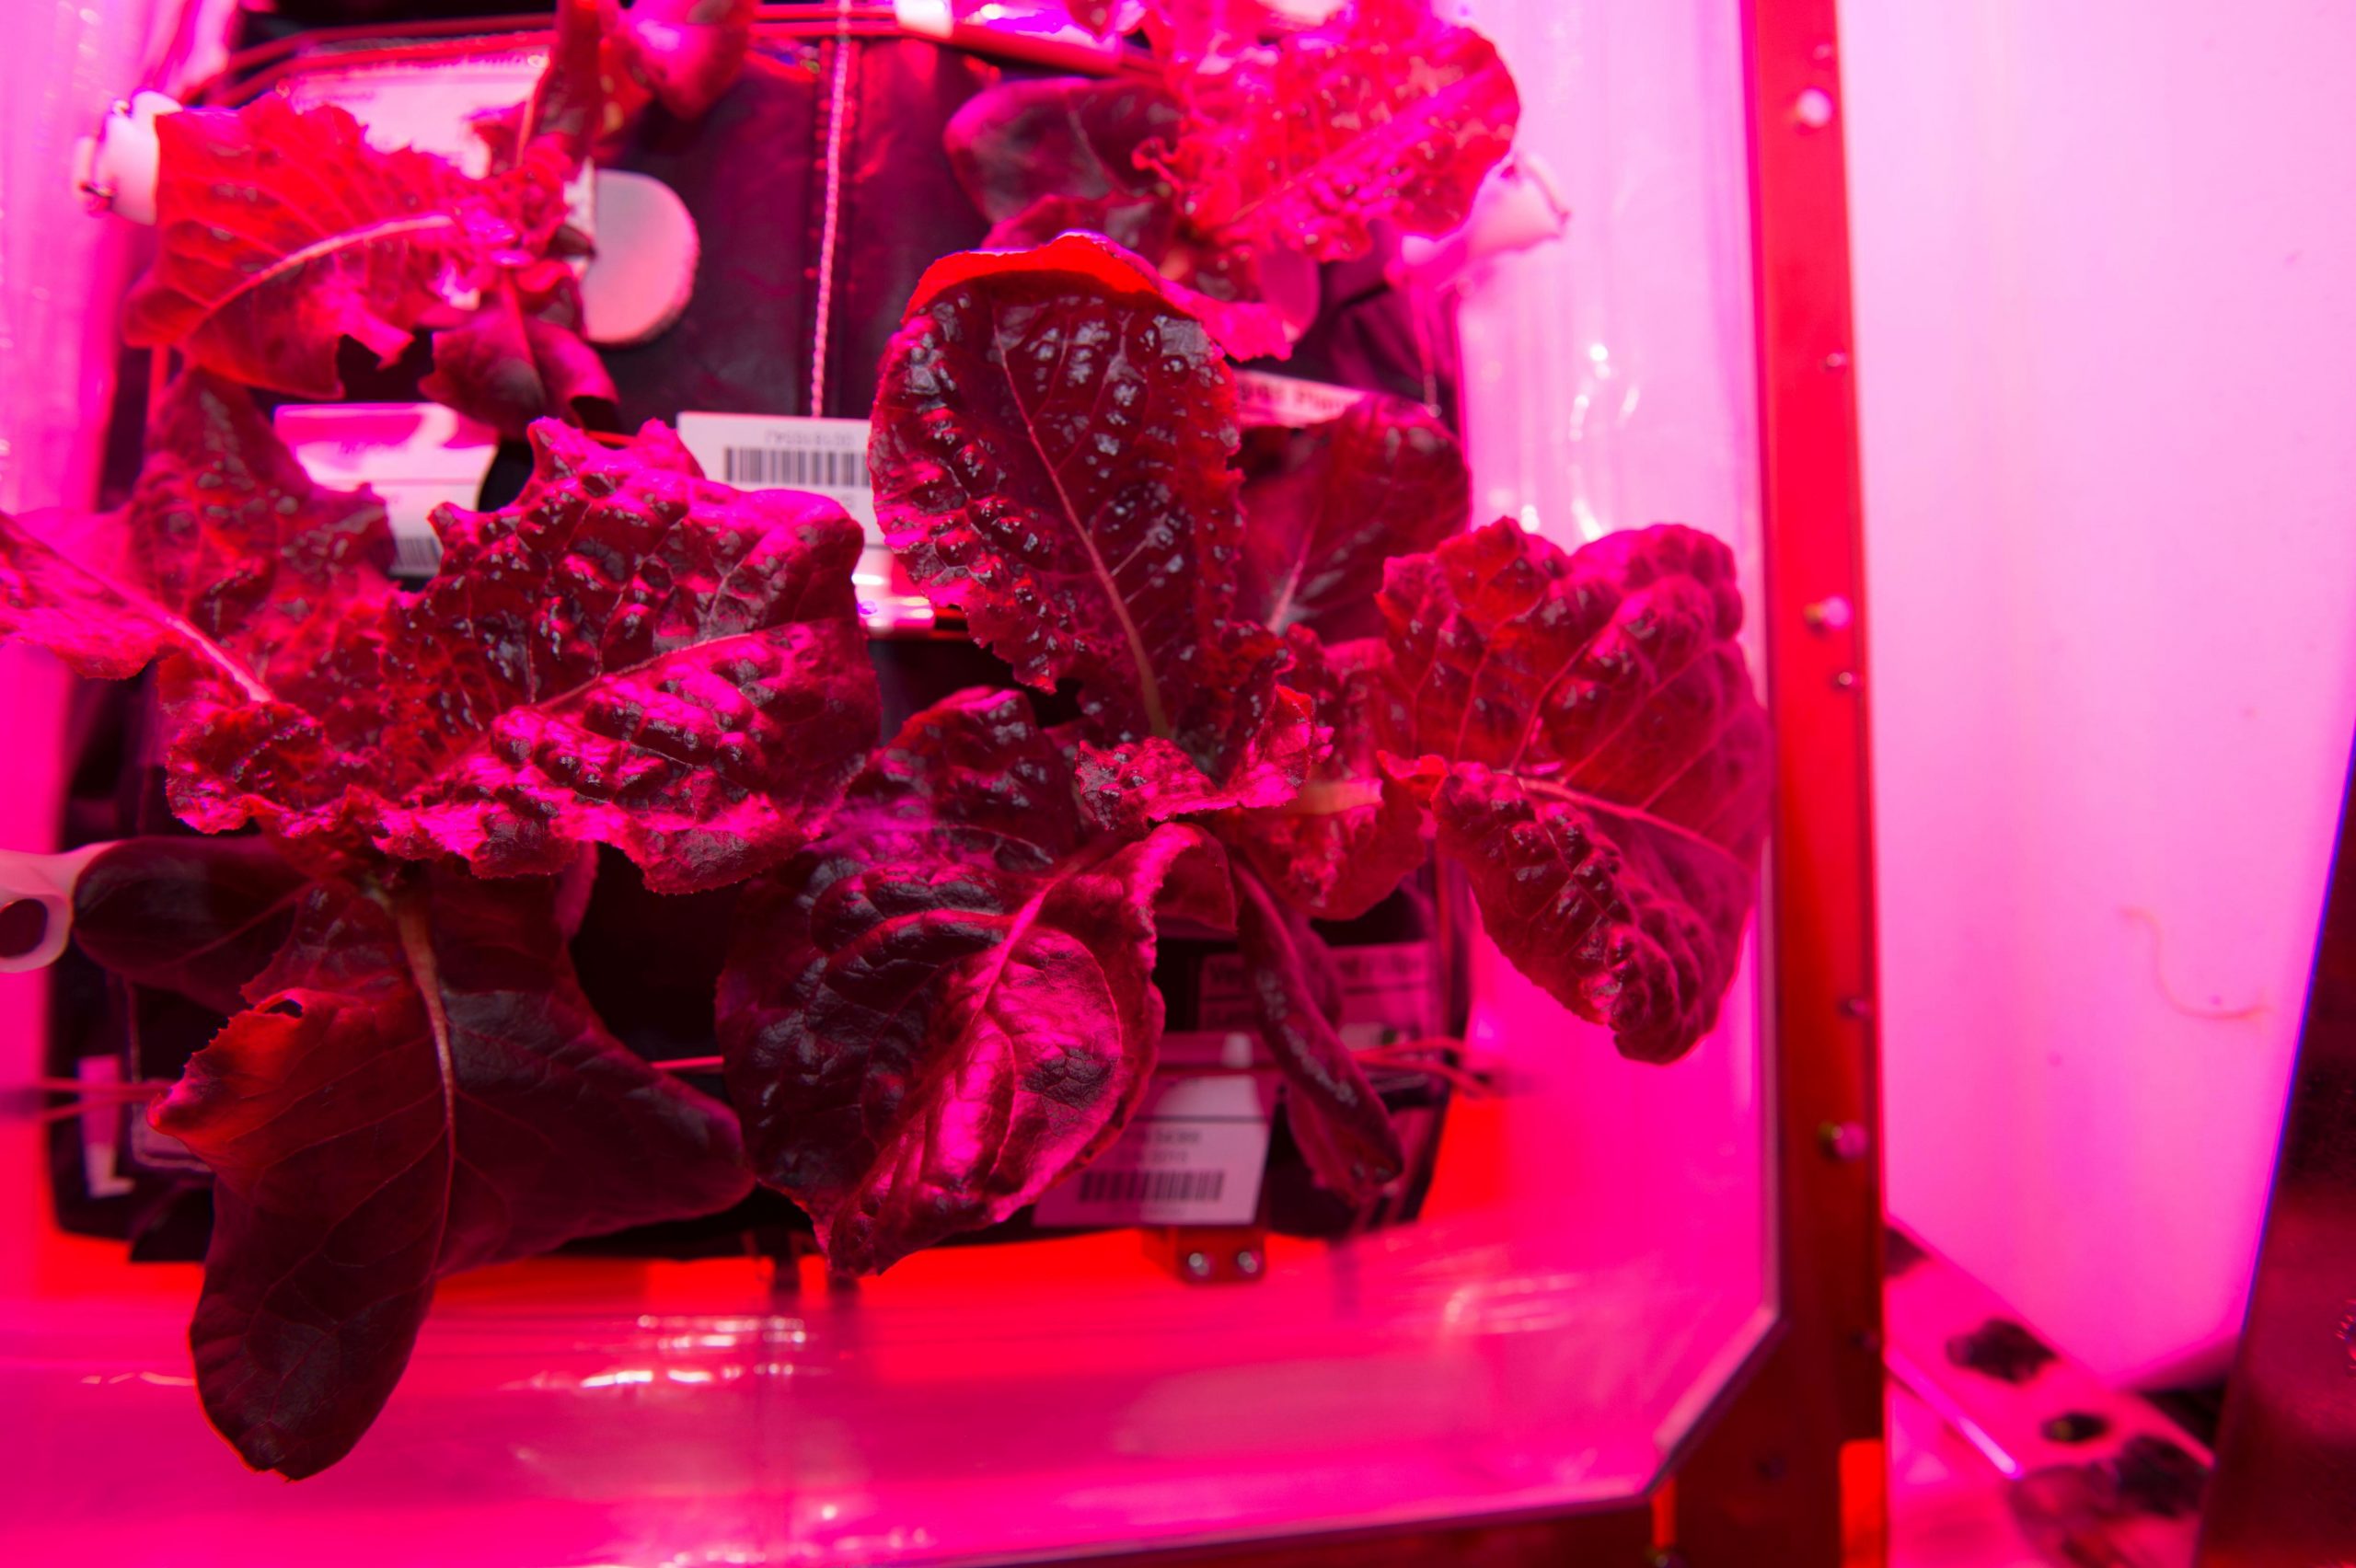 PR42 Astrofarmer – Learning about conditions for plant growth